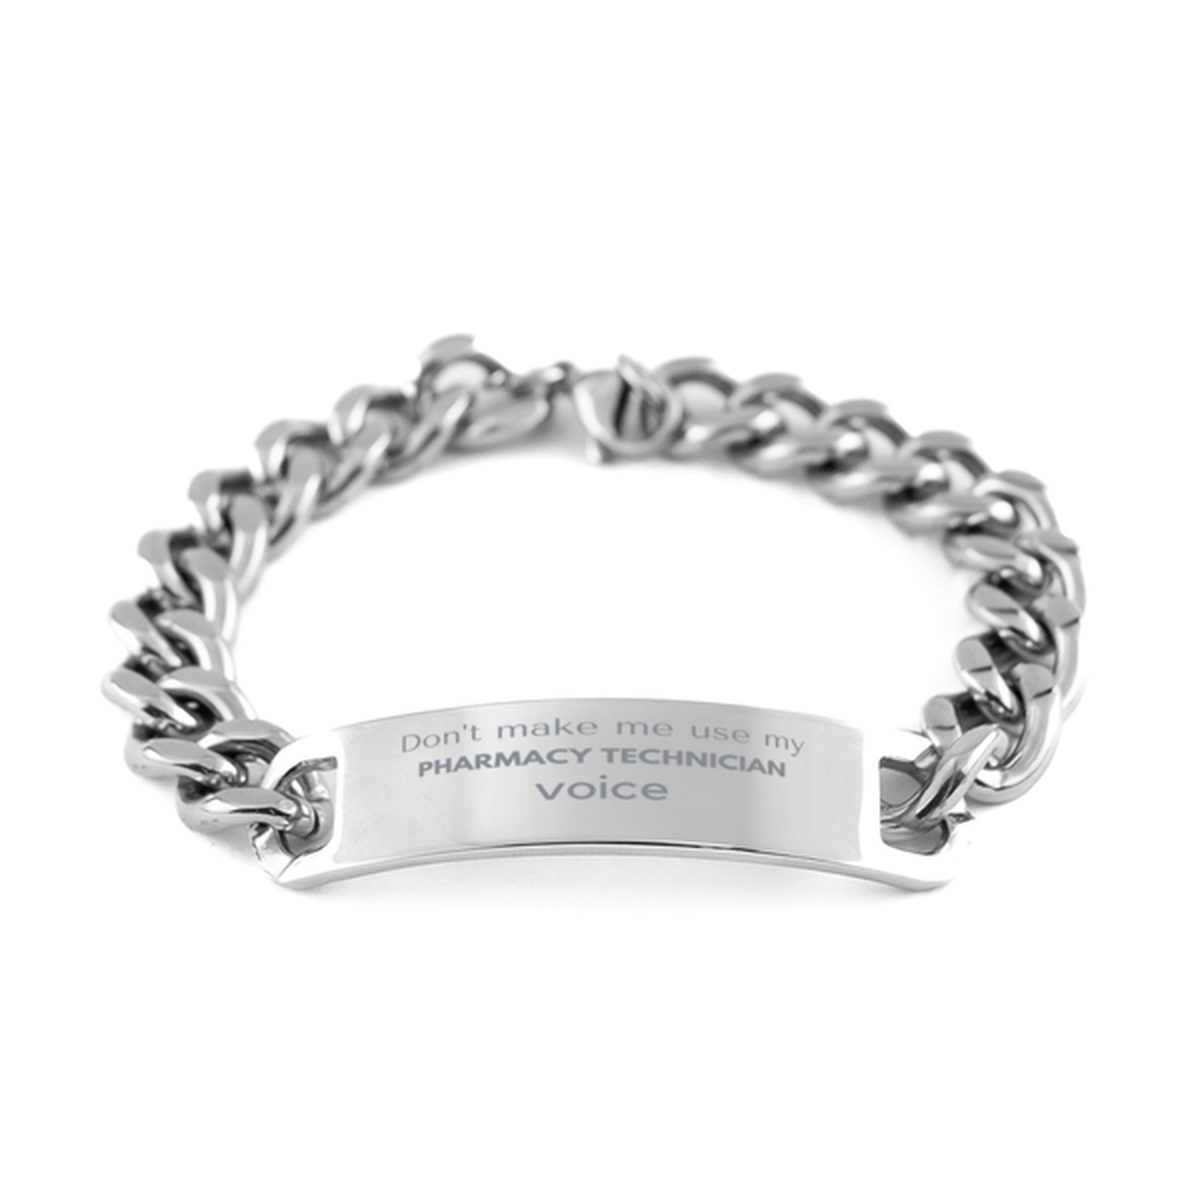 Don't make me use my Pharmacy Technician voice, Sarcasm Pharmacy Technician Gifts, Christmas Pharmacy Technician Cuban Chain Stainless Steel Bracelet Birthday Unique Gifts For Pharmacy Technician Coworkers, Men, Women, Colleague, Friends